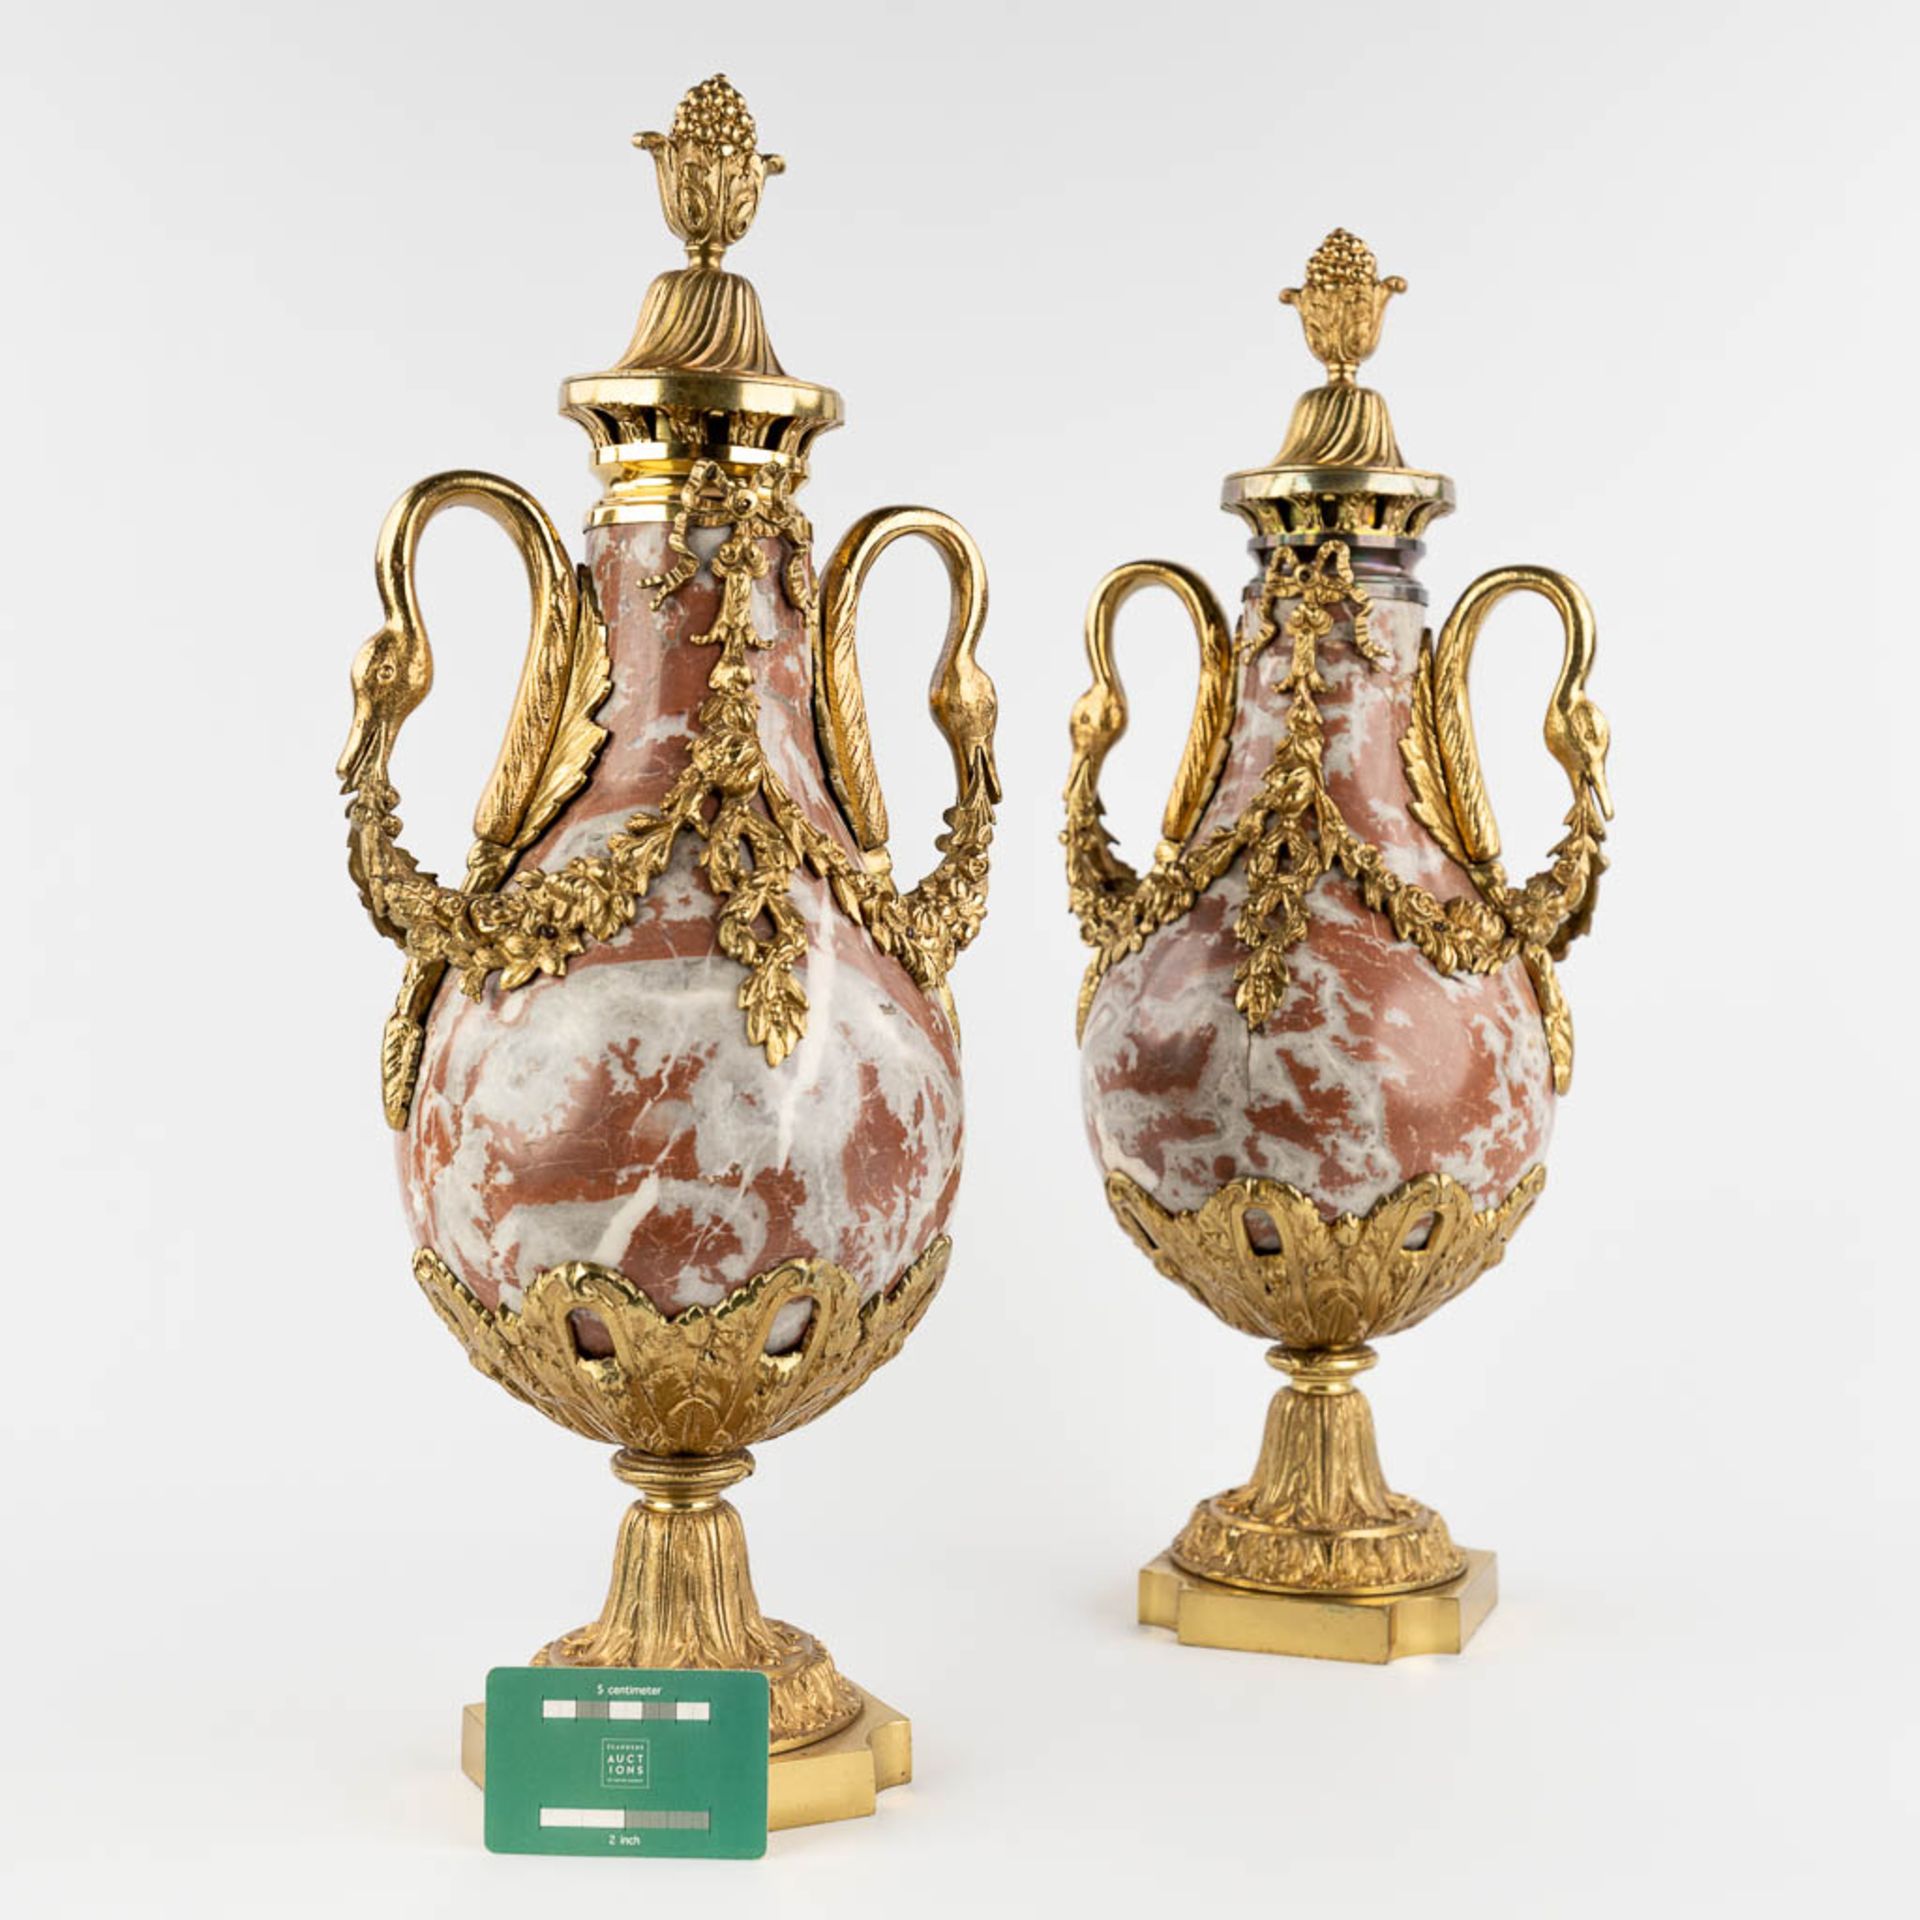 A pair of cassolettes, red and grey marble mounted with bronze in Empire style. (D:18 x W:23 x H:54  - Bild 2 aus 13